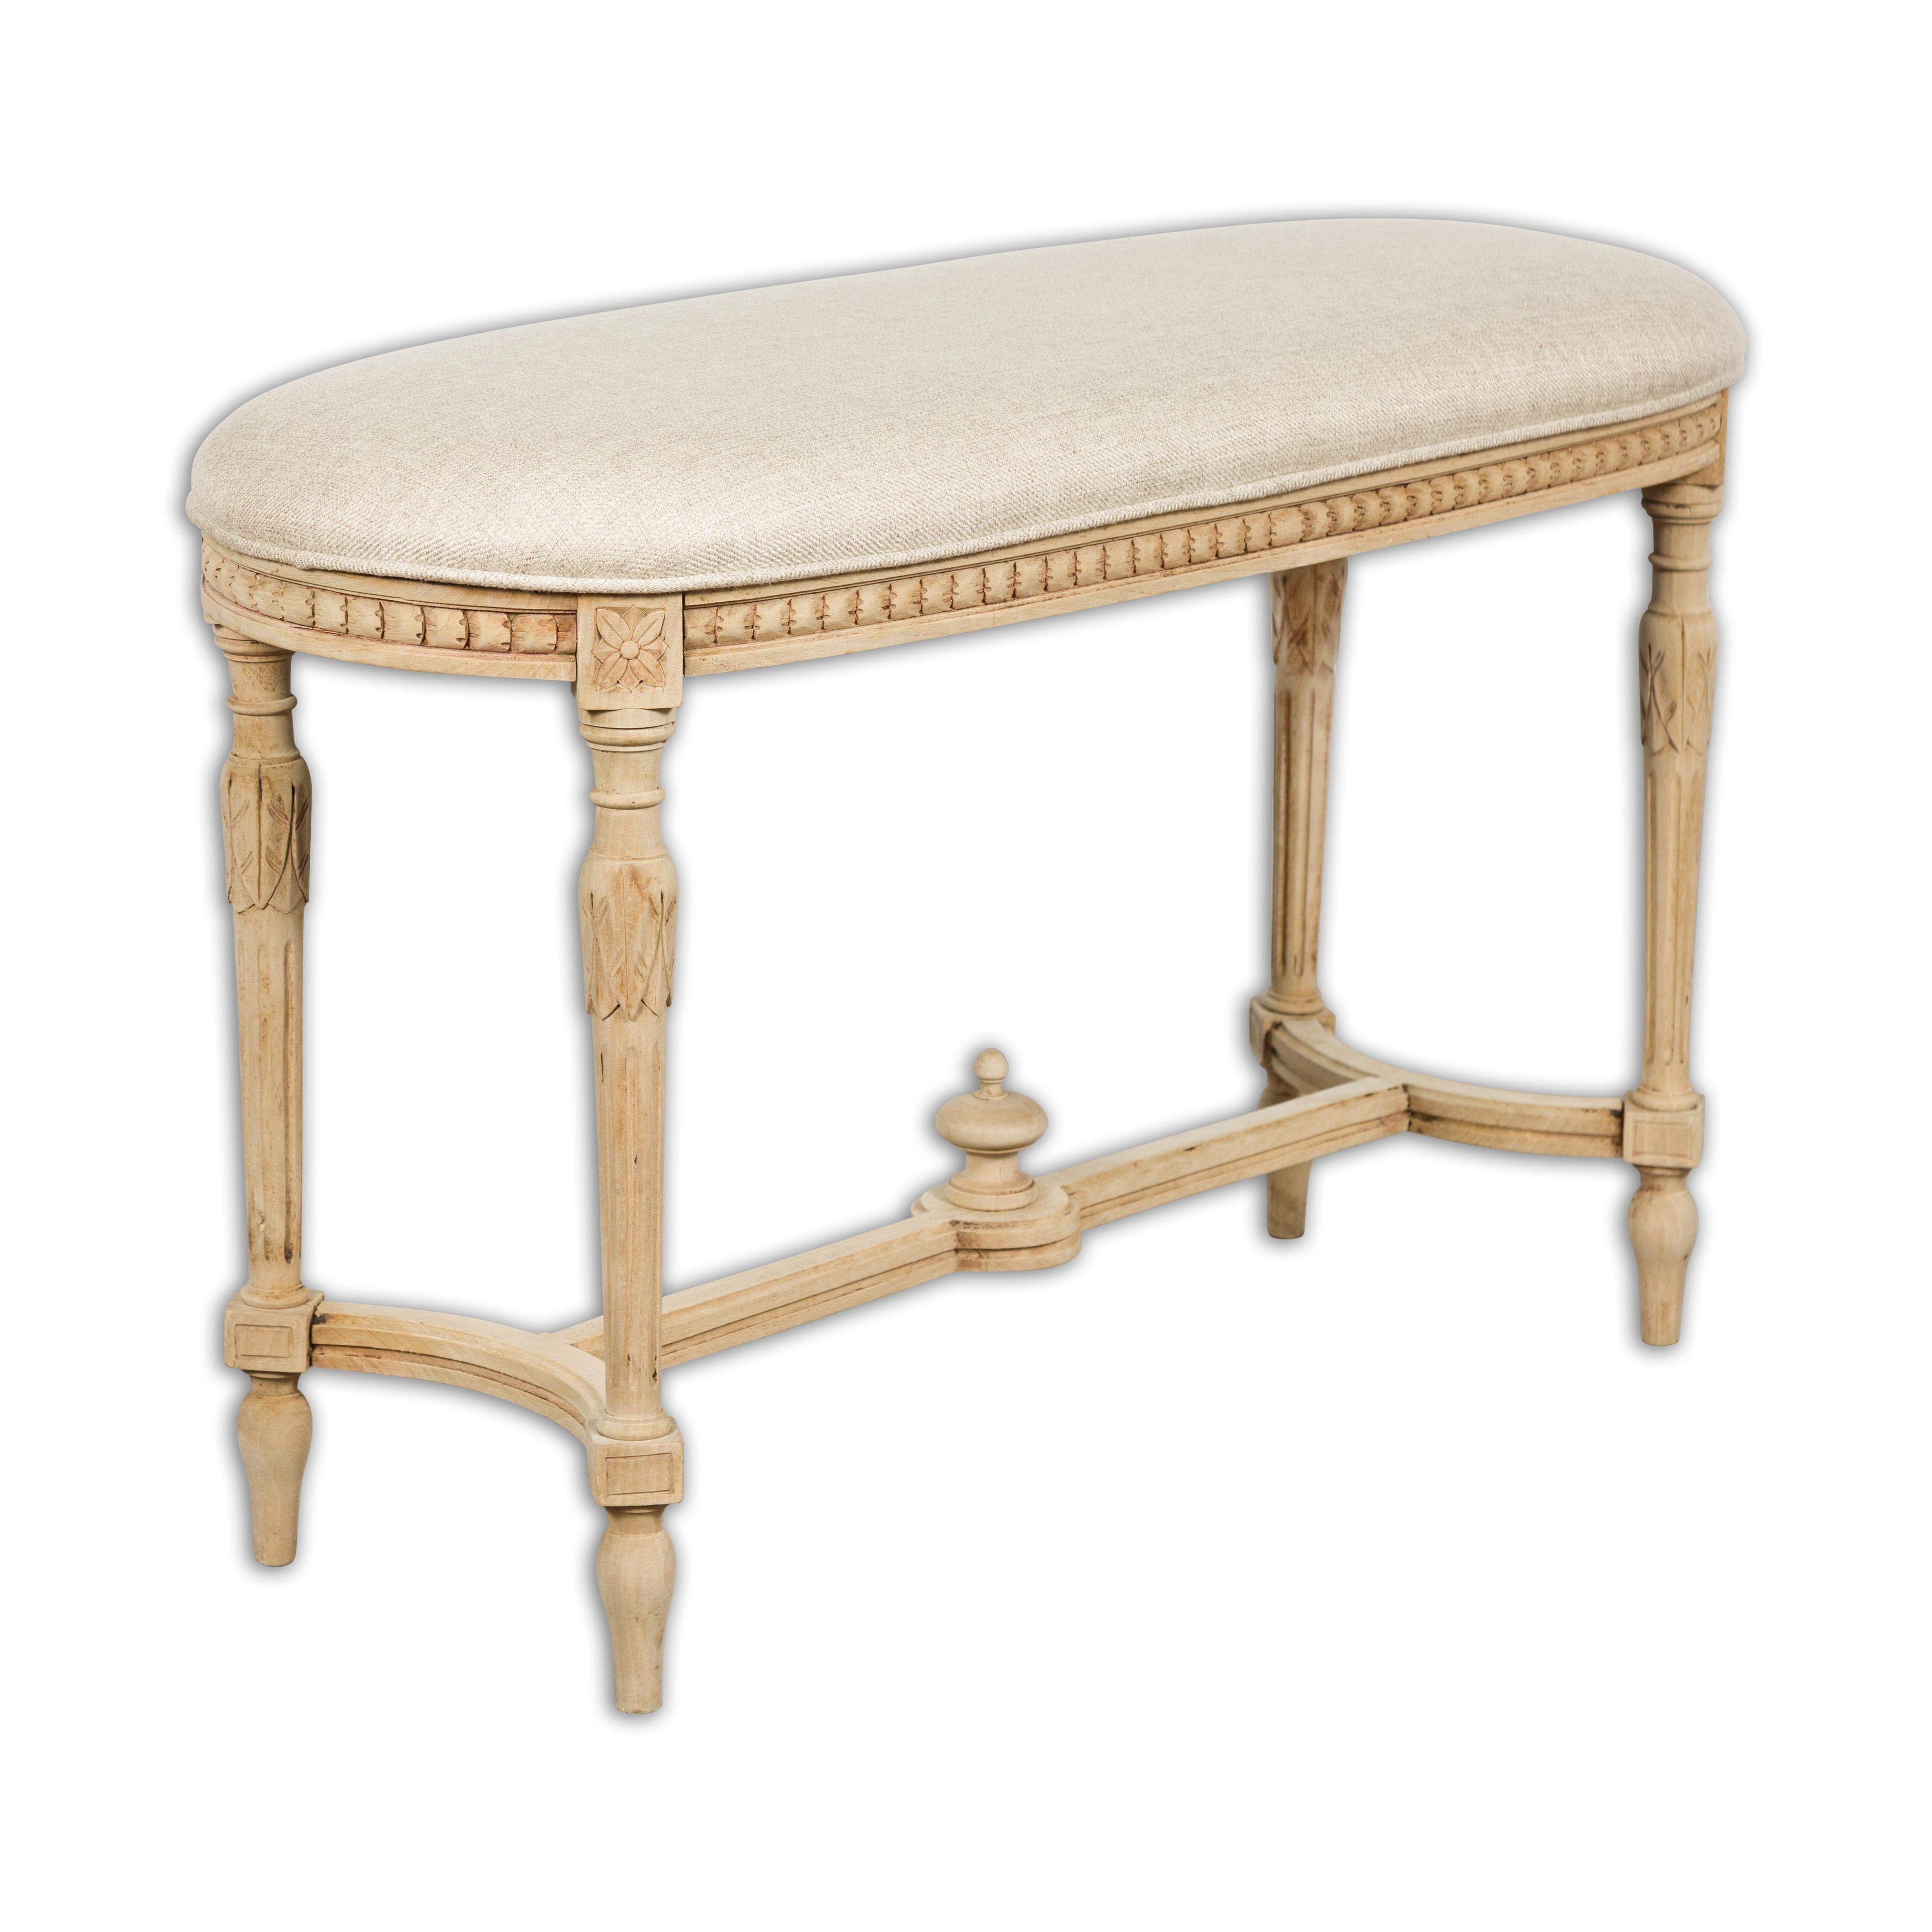 A French Neoclassical style walnut bench from circa 1900 with carved décor, fluted carved legs on arrow feet and cross stretcher. Imbued with the timeless elegance of the Neoclassical style, this French walnut bench from circa 1900 boasts a